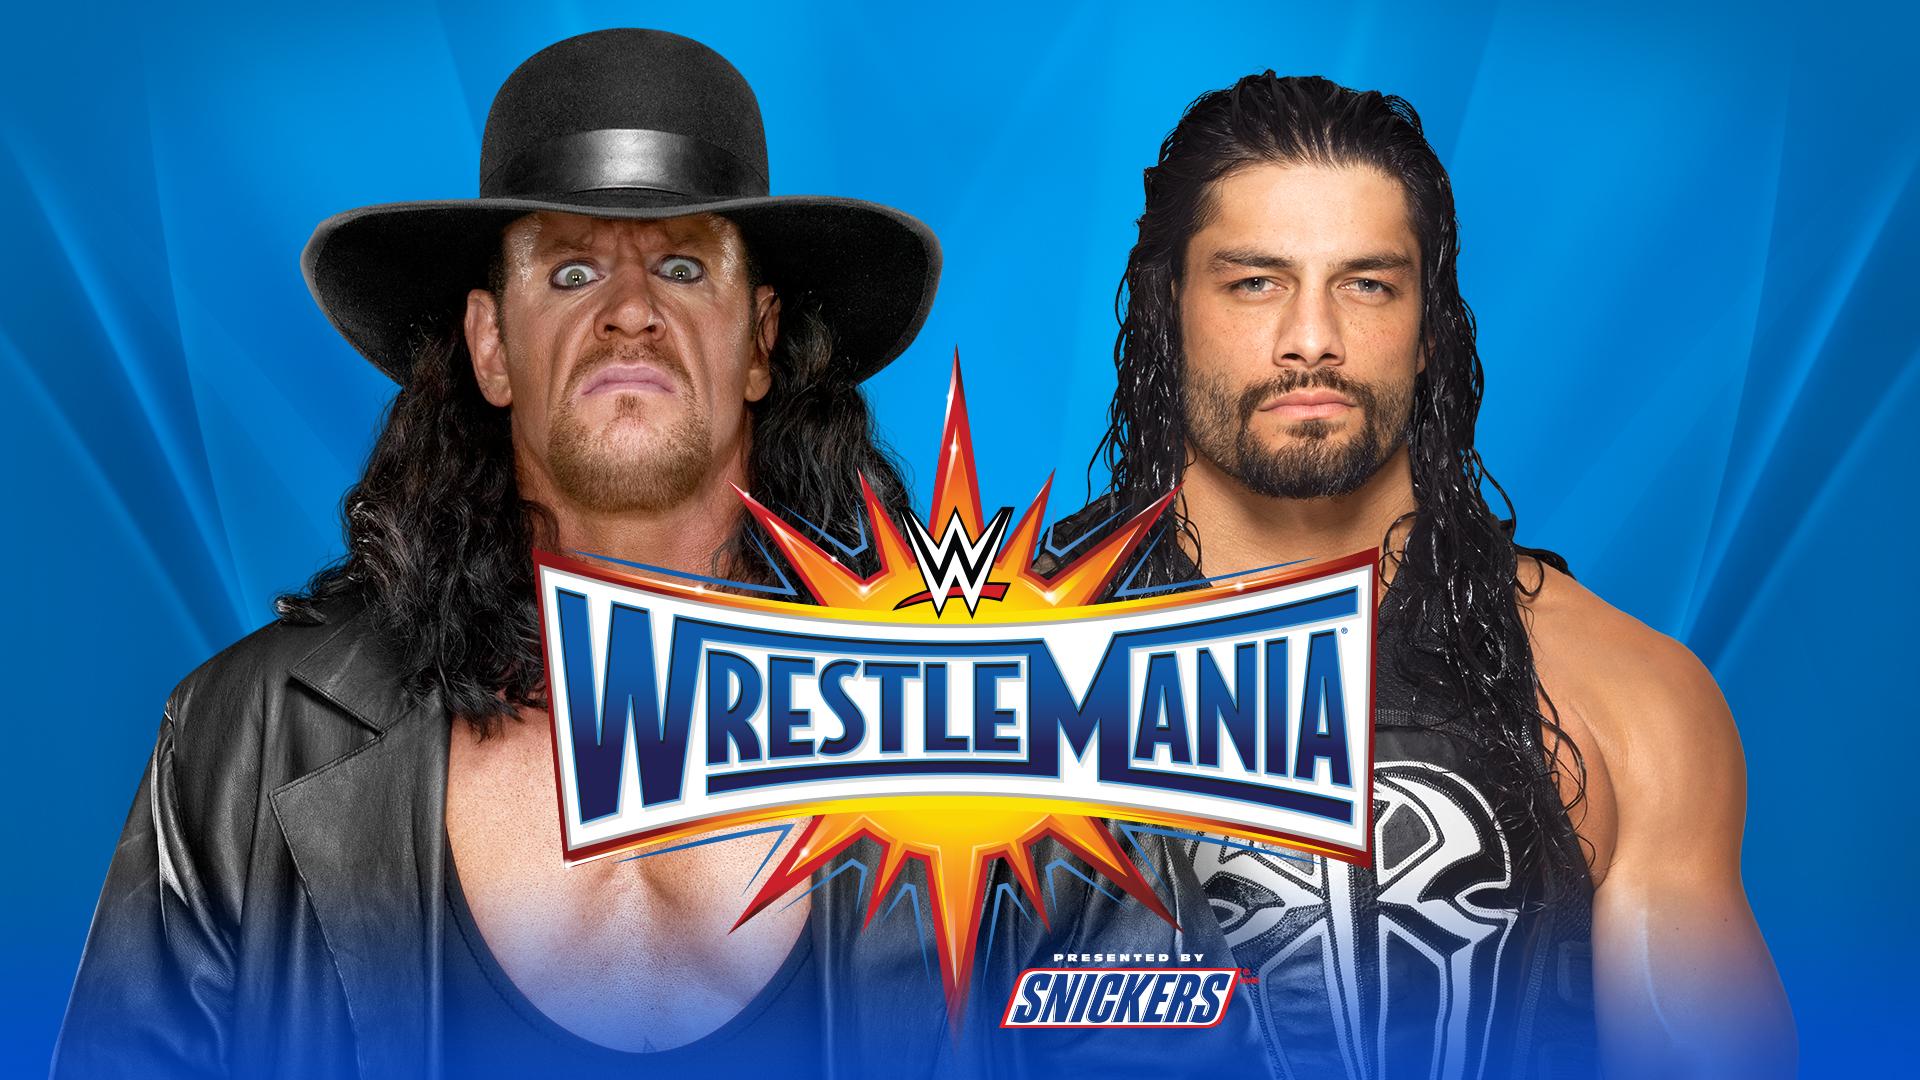 Roman Reigns Vs. The Undertaker Announced For WWE WrestleMania 33 Wrestling News News, AEW News, WWE Results, Spoilers, WrestleMania 39 Results